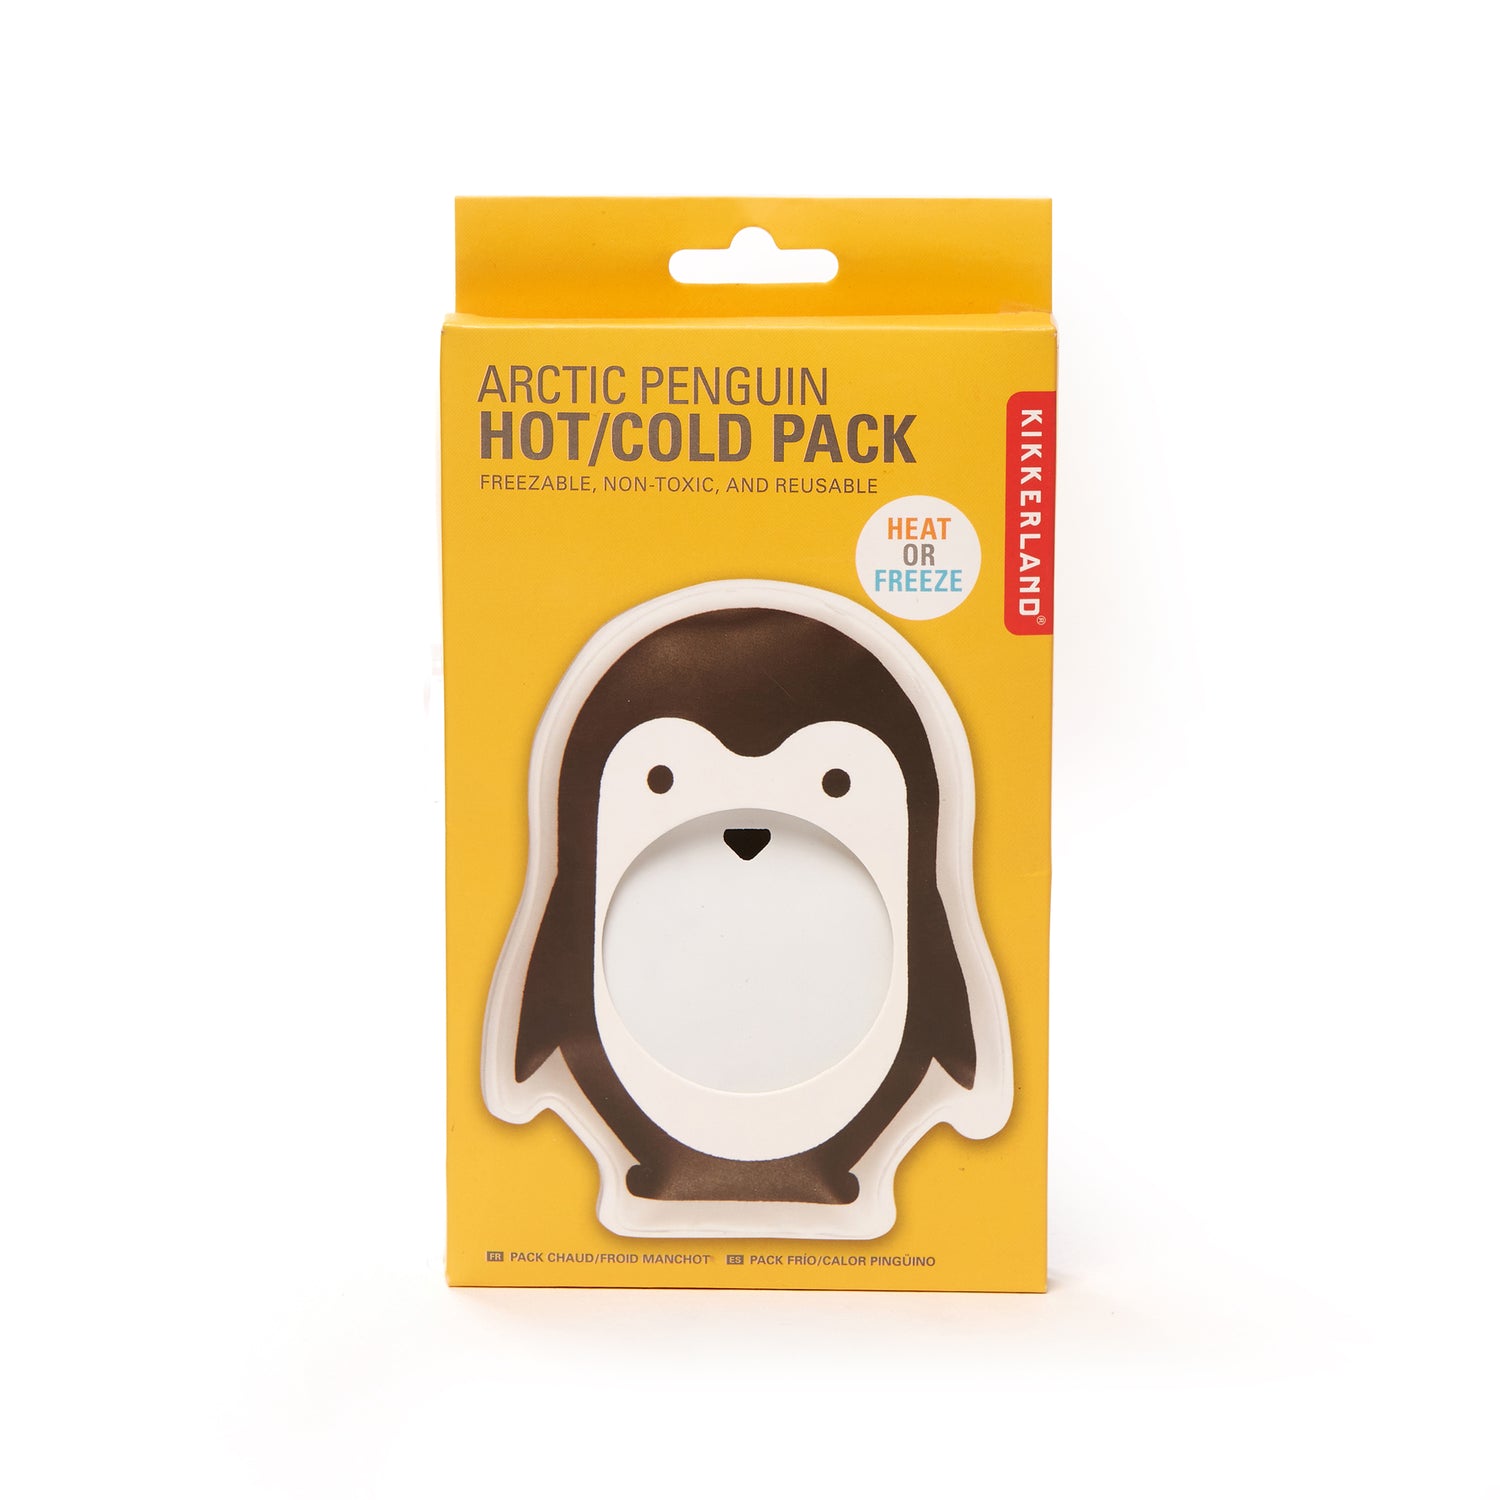 Arctic Penguin Hot/Cold Pack